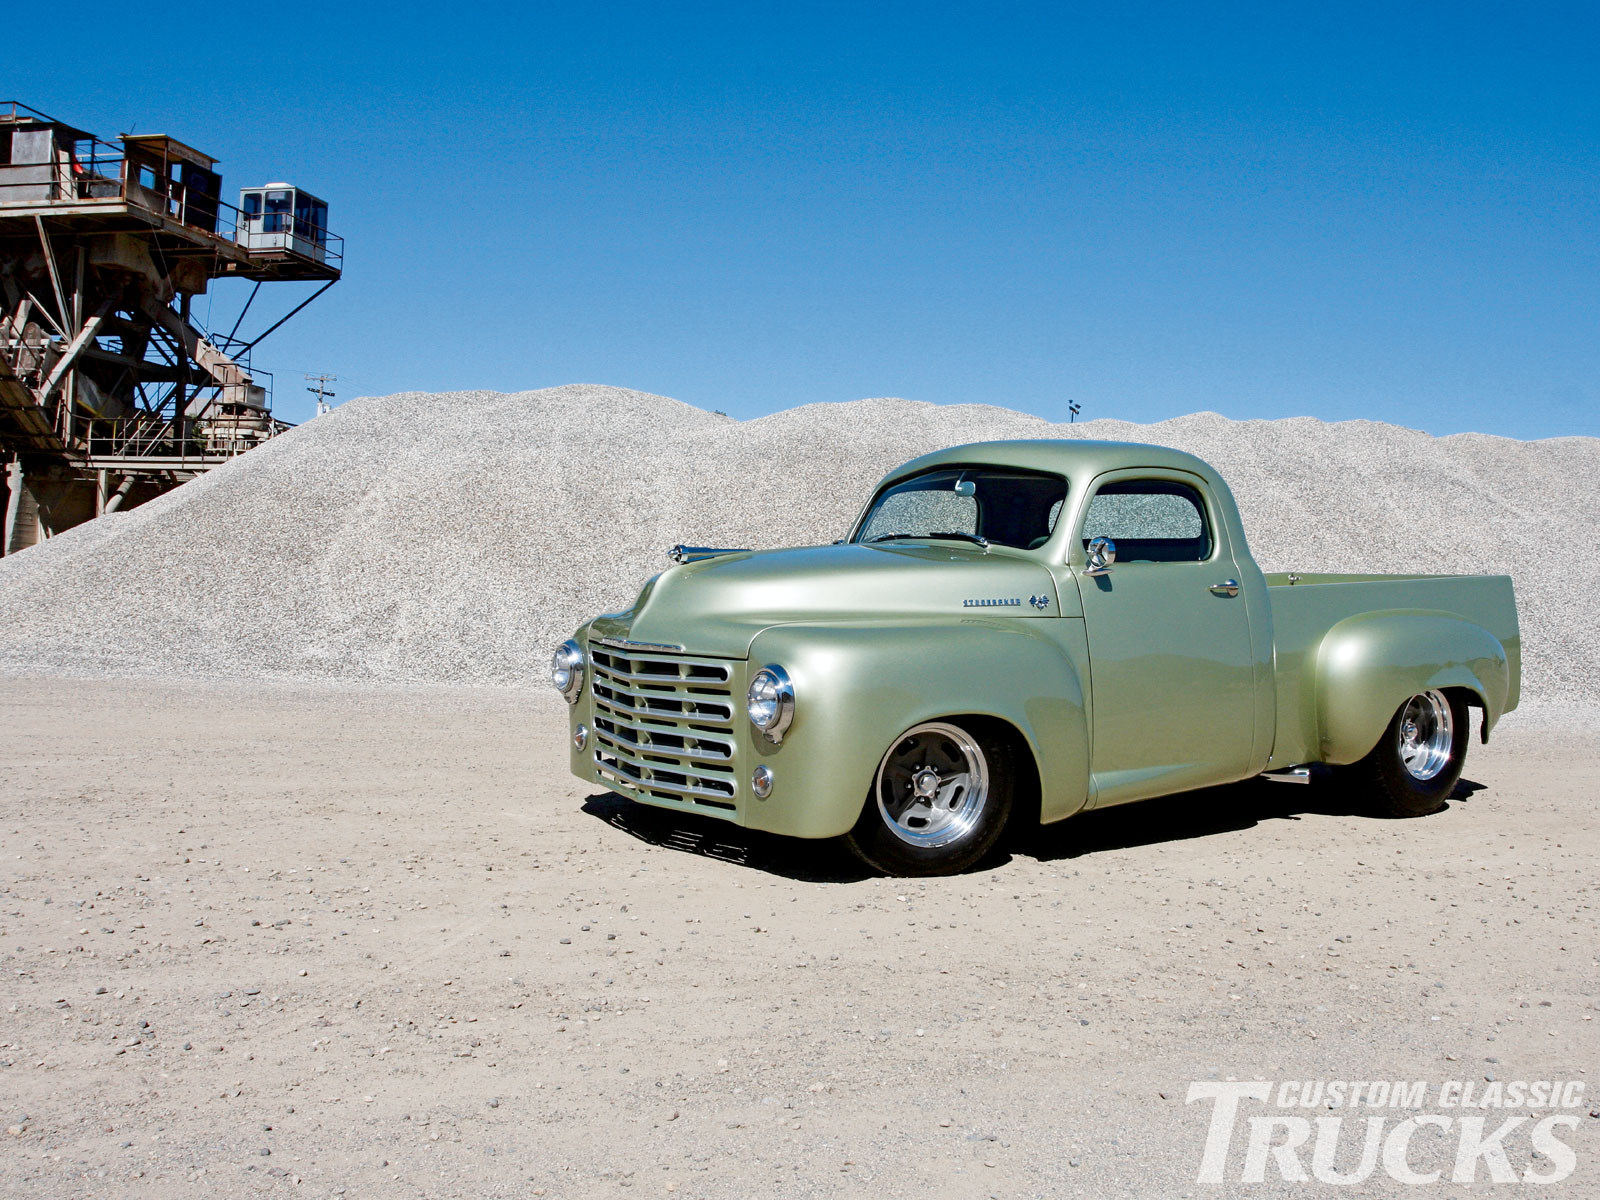 Studebaker Pickup Photo Gallery: Photo #10 out of 12, Image Size ...